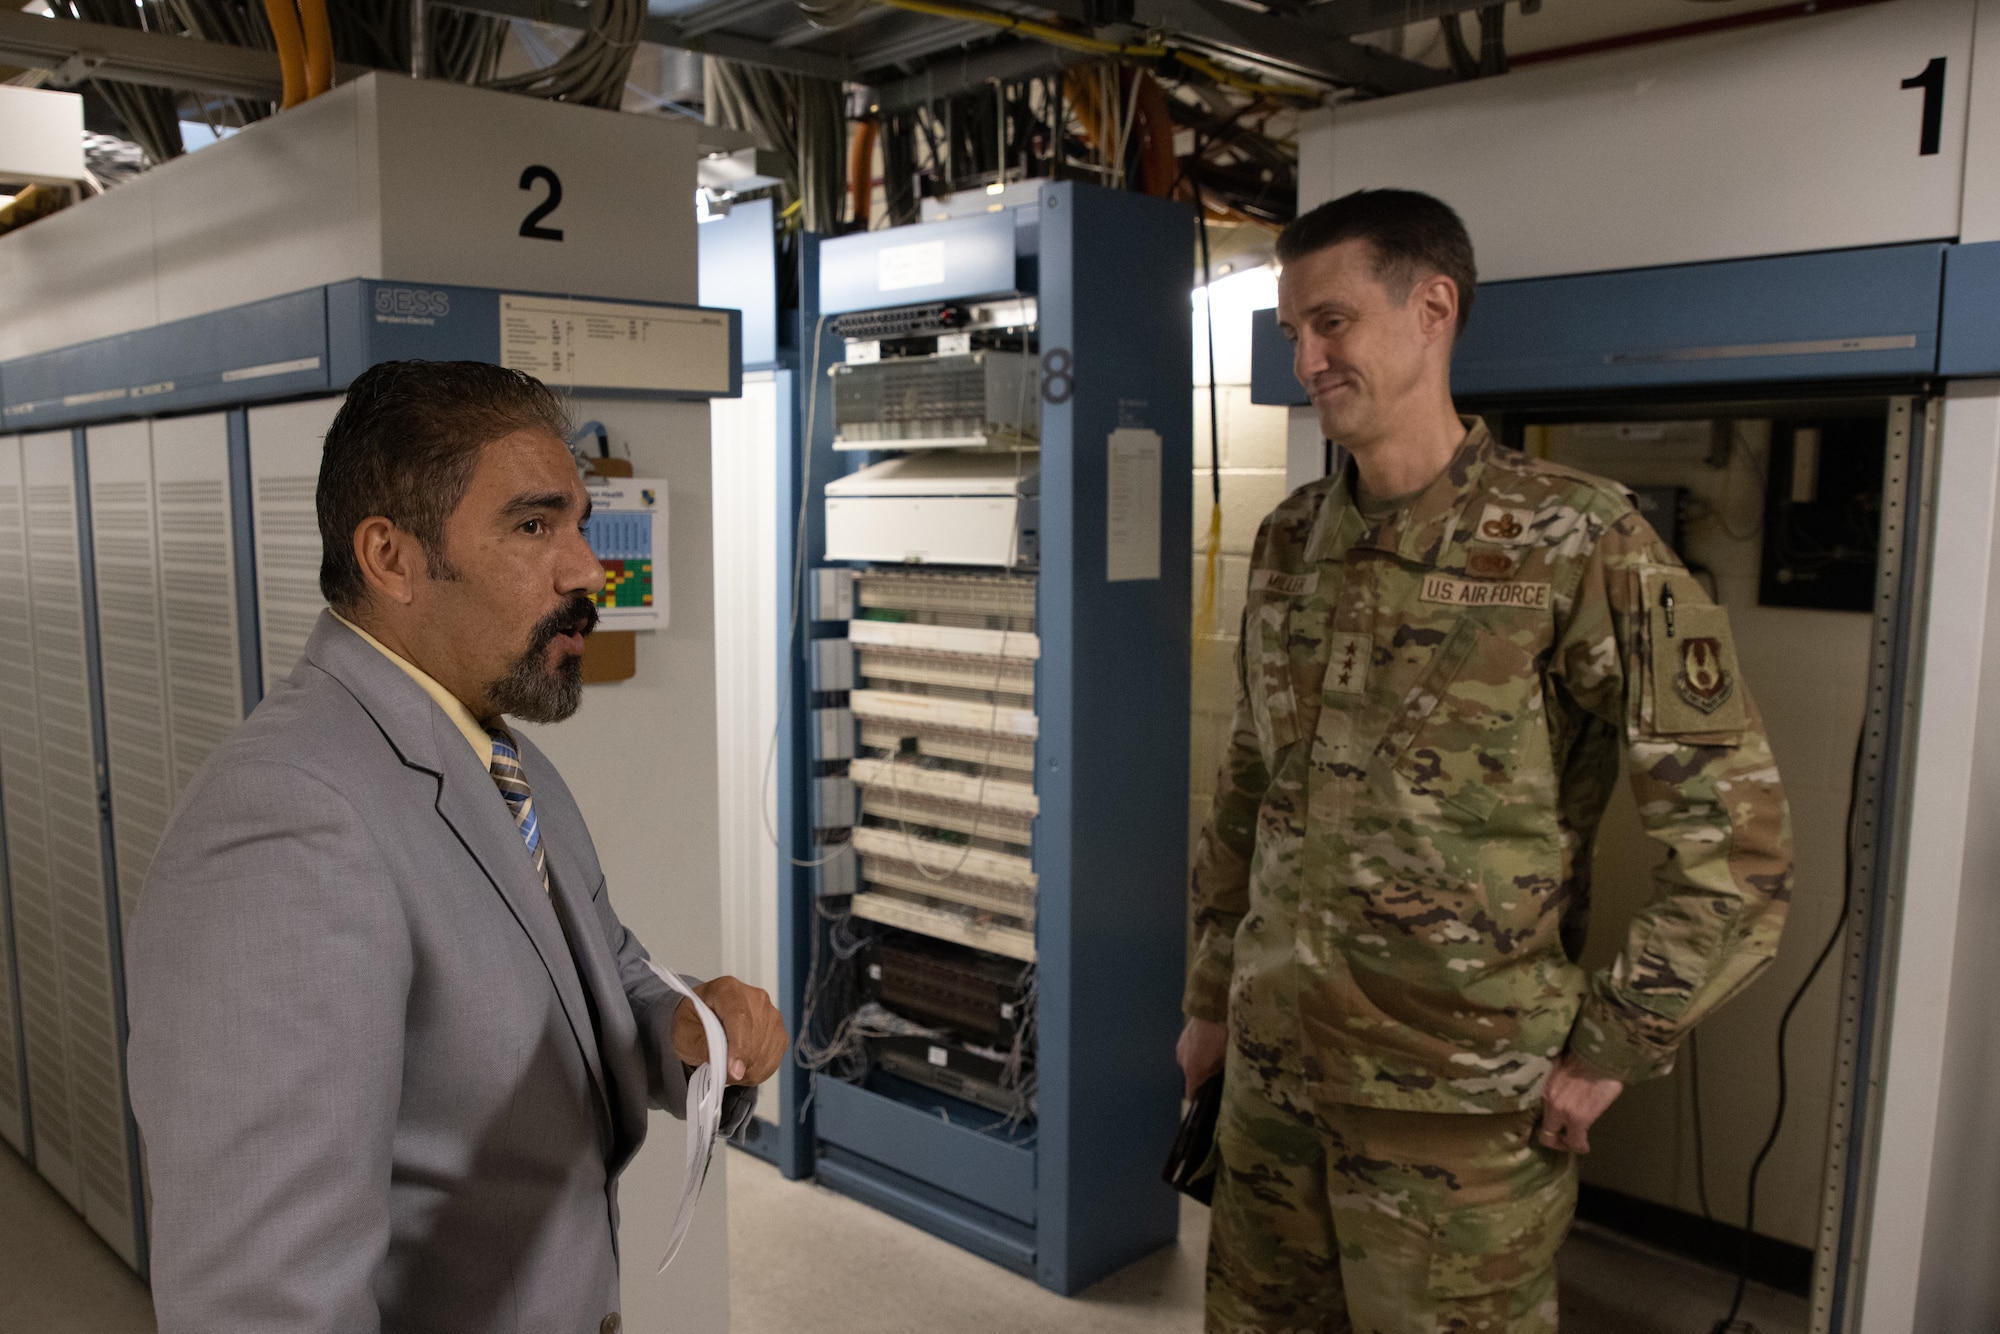 Man in suit talking to Airman in front of phone equipment